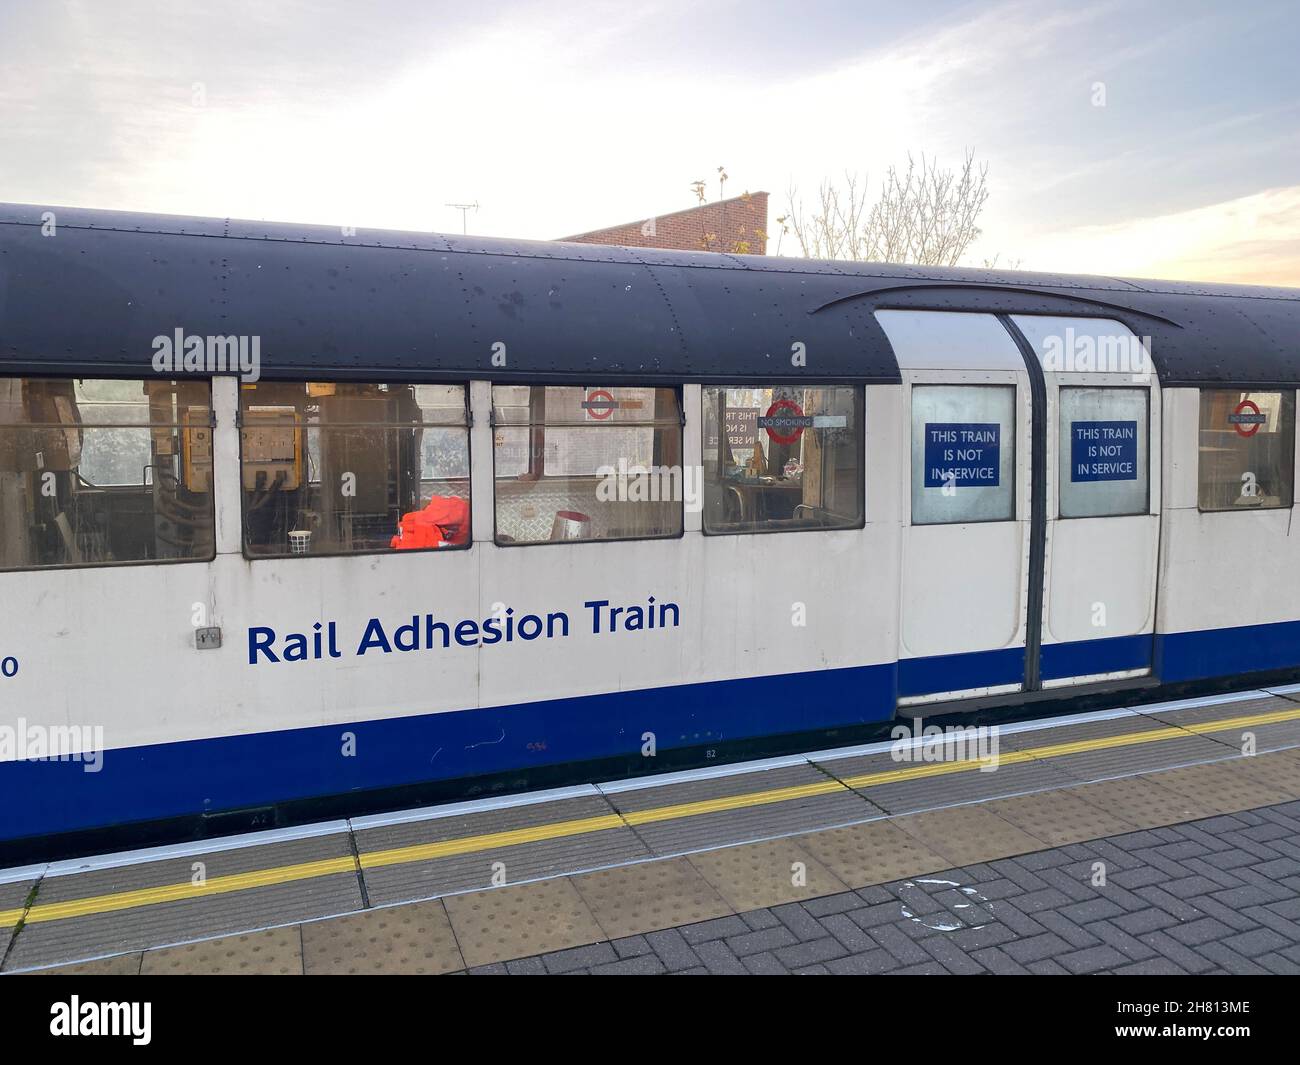 A Rail Adhesion Train running on the Central Line of the London Underground, near Ruislip Gardens. The train dispenses an adhesive material on to the rails to help the wheels on Tube trains grip the track during periods of leaf fall. Picture date: Thursday November 25, 2021. Stock Photo